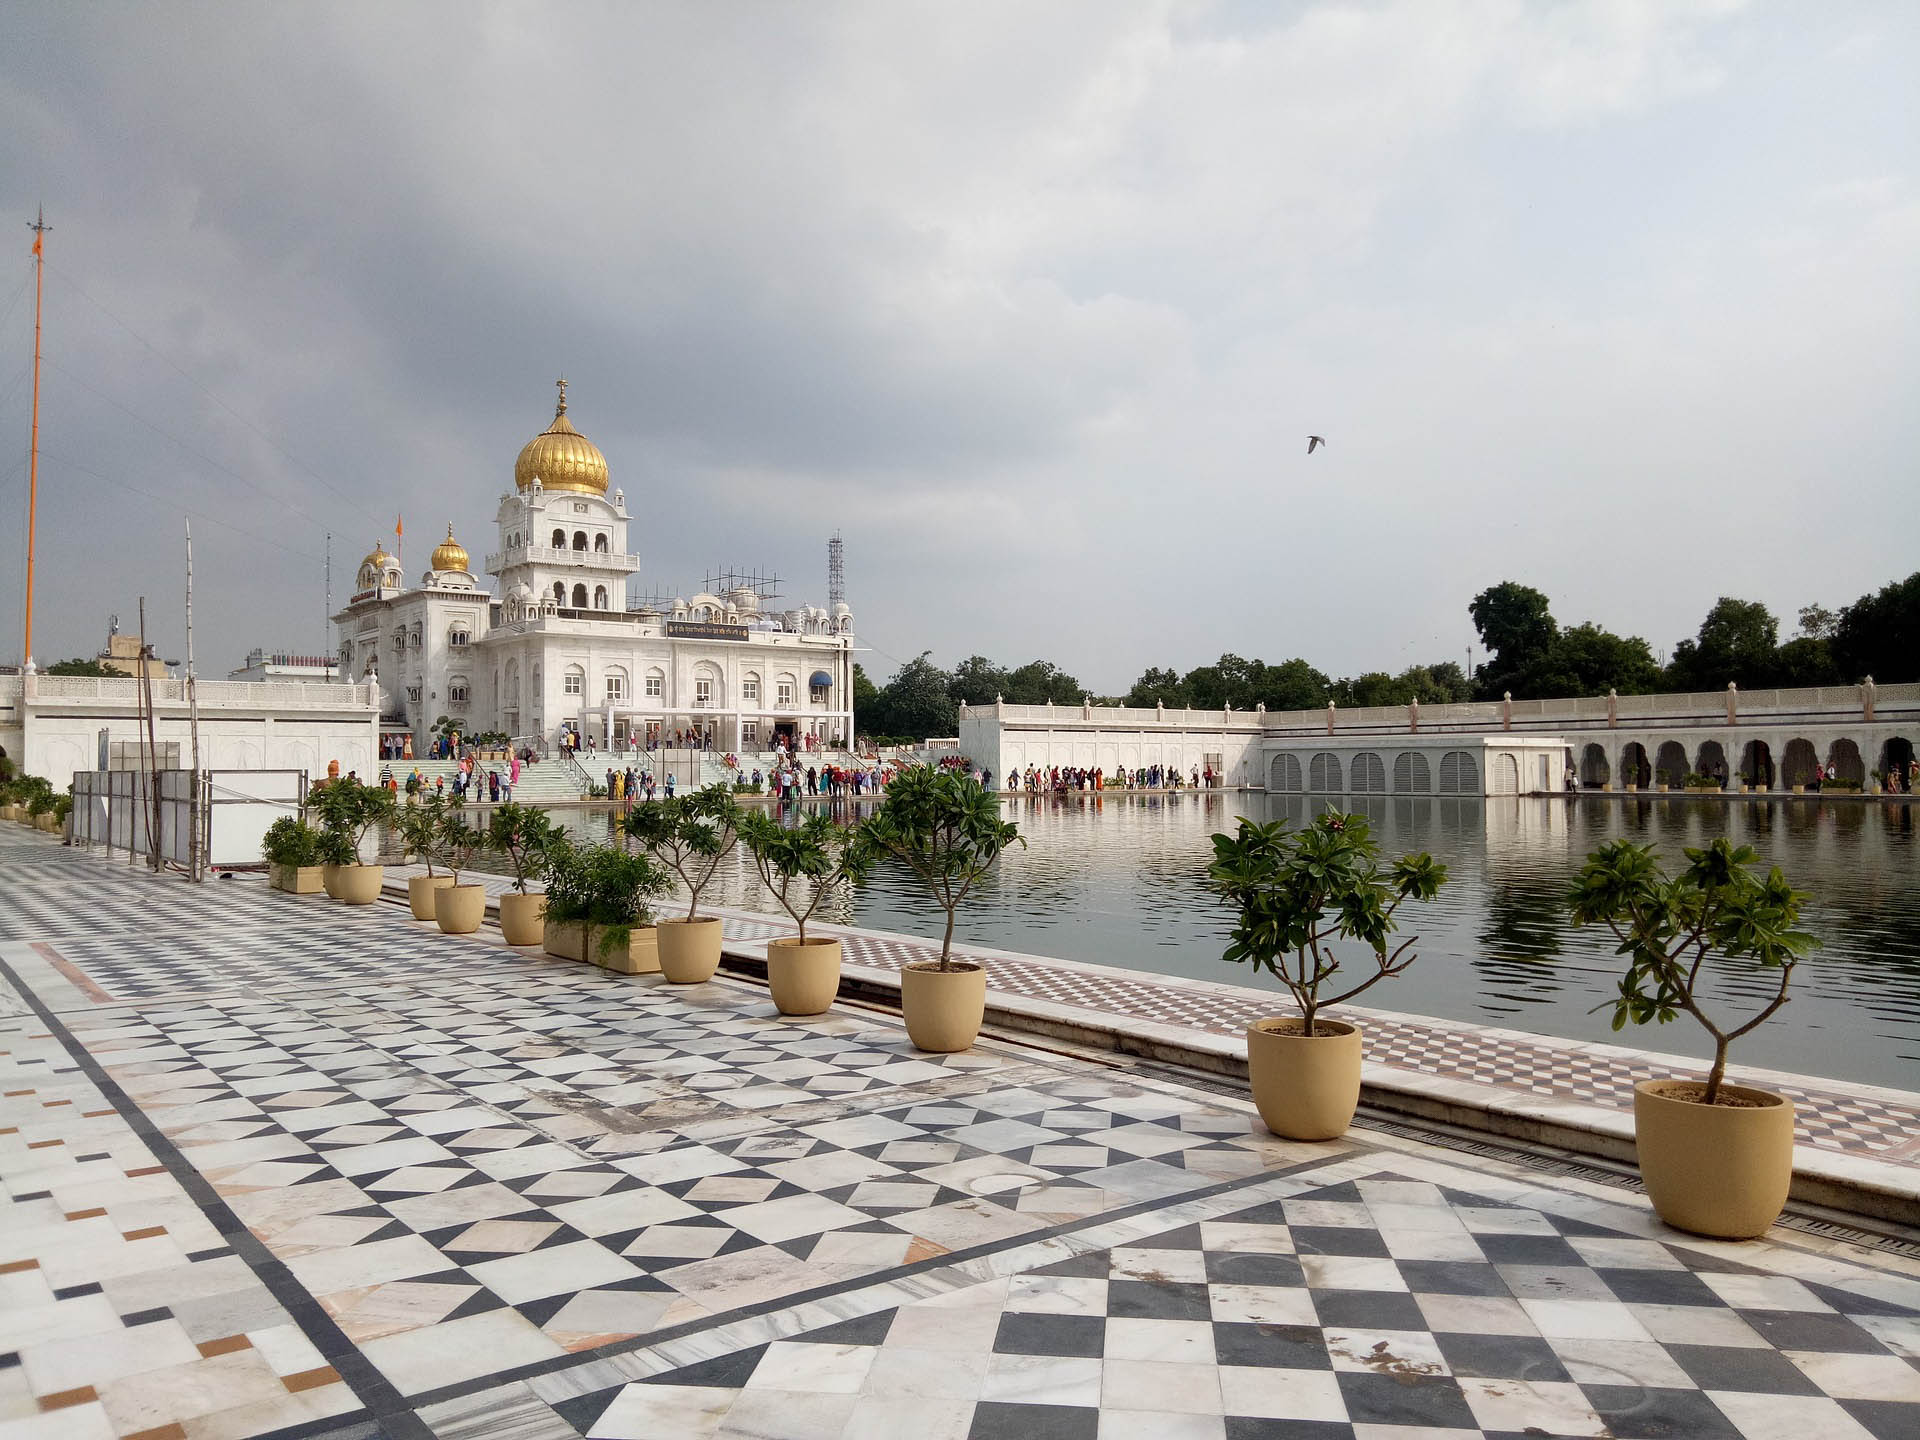 The Most Amazing Gurudwara and Langar Experience A day in New Delhi